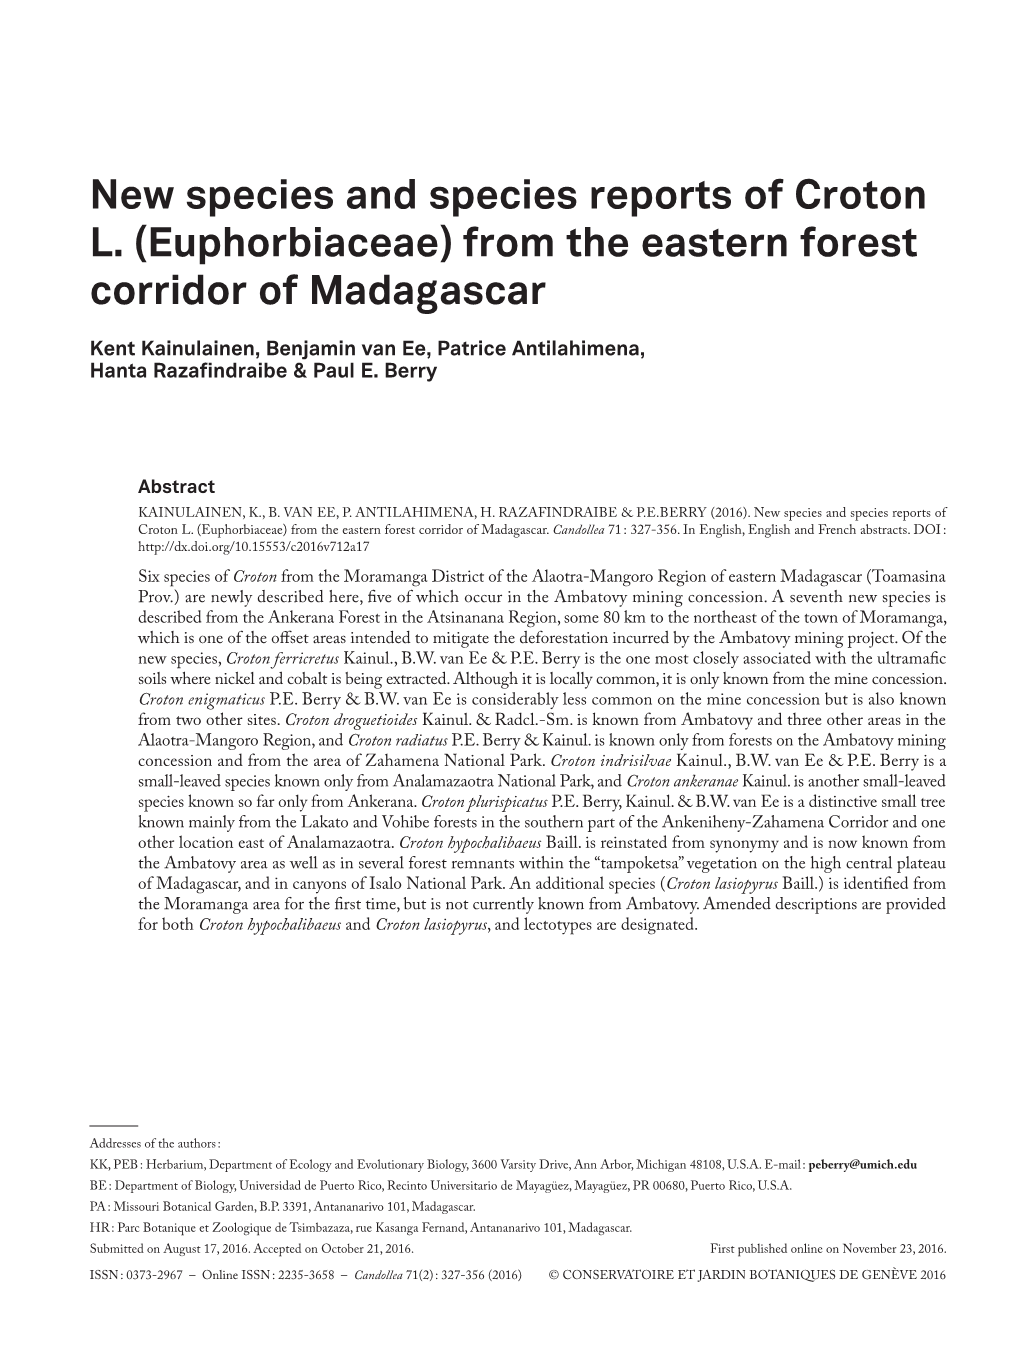 New Species and Species Reports of Croton L. (Euphorbiaceae) from the Eastern Forest Corridor of Madagascar